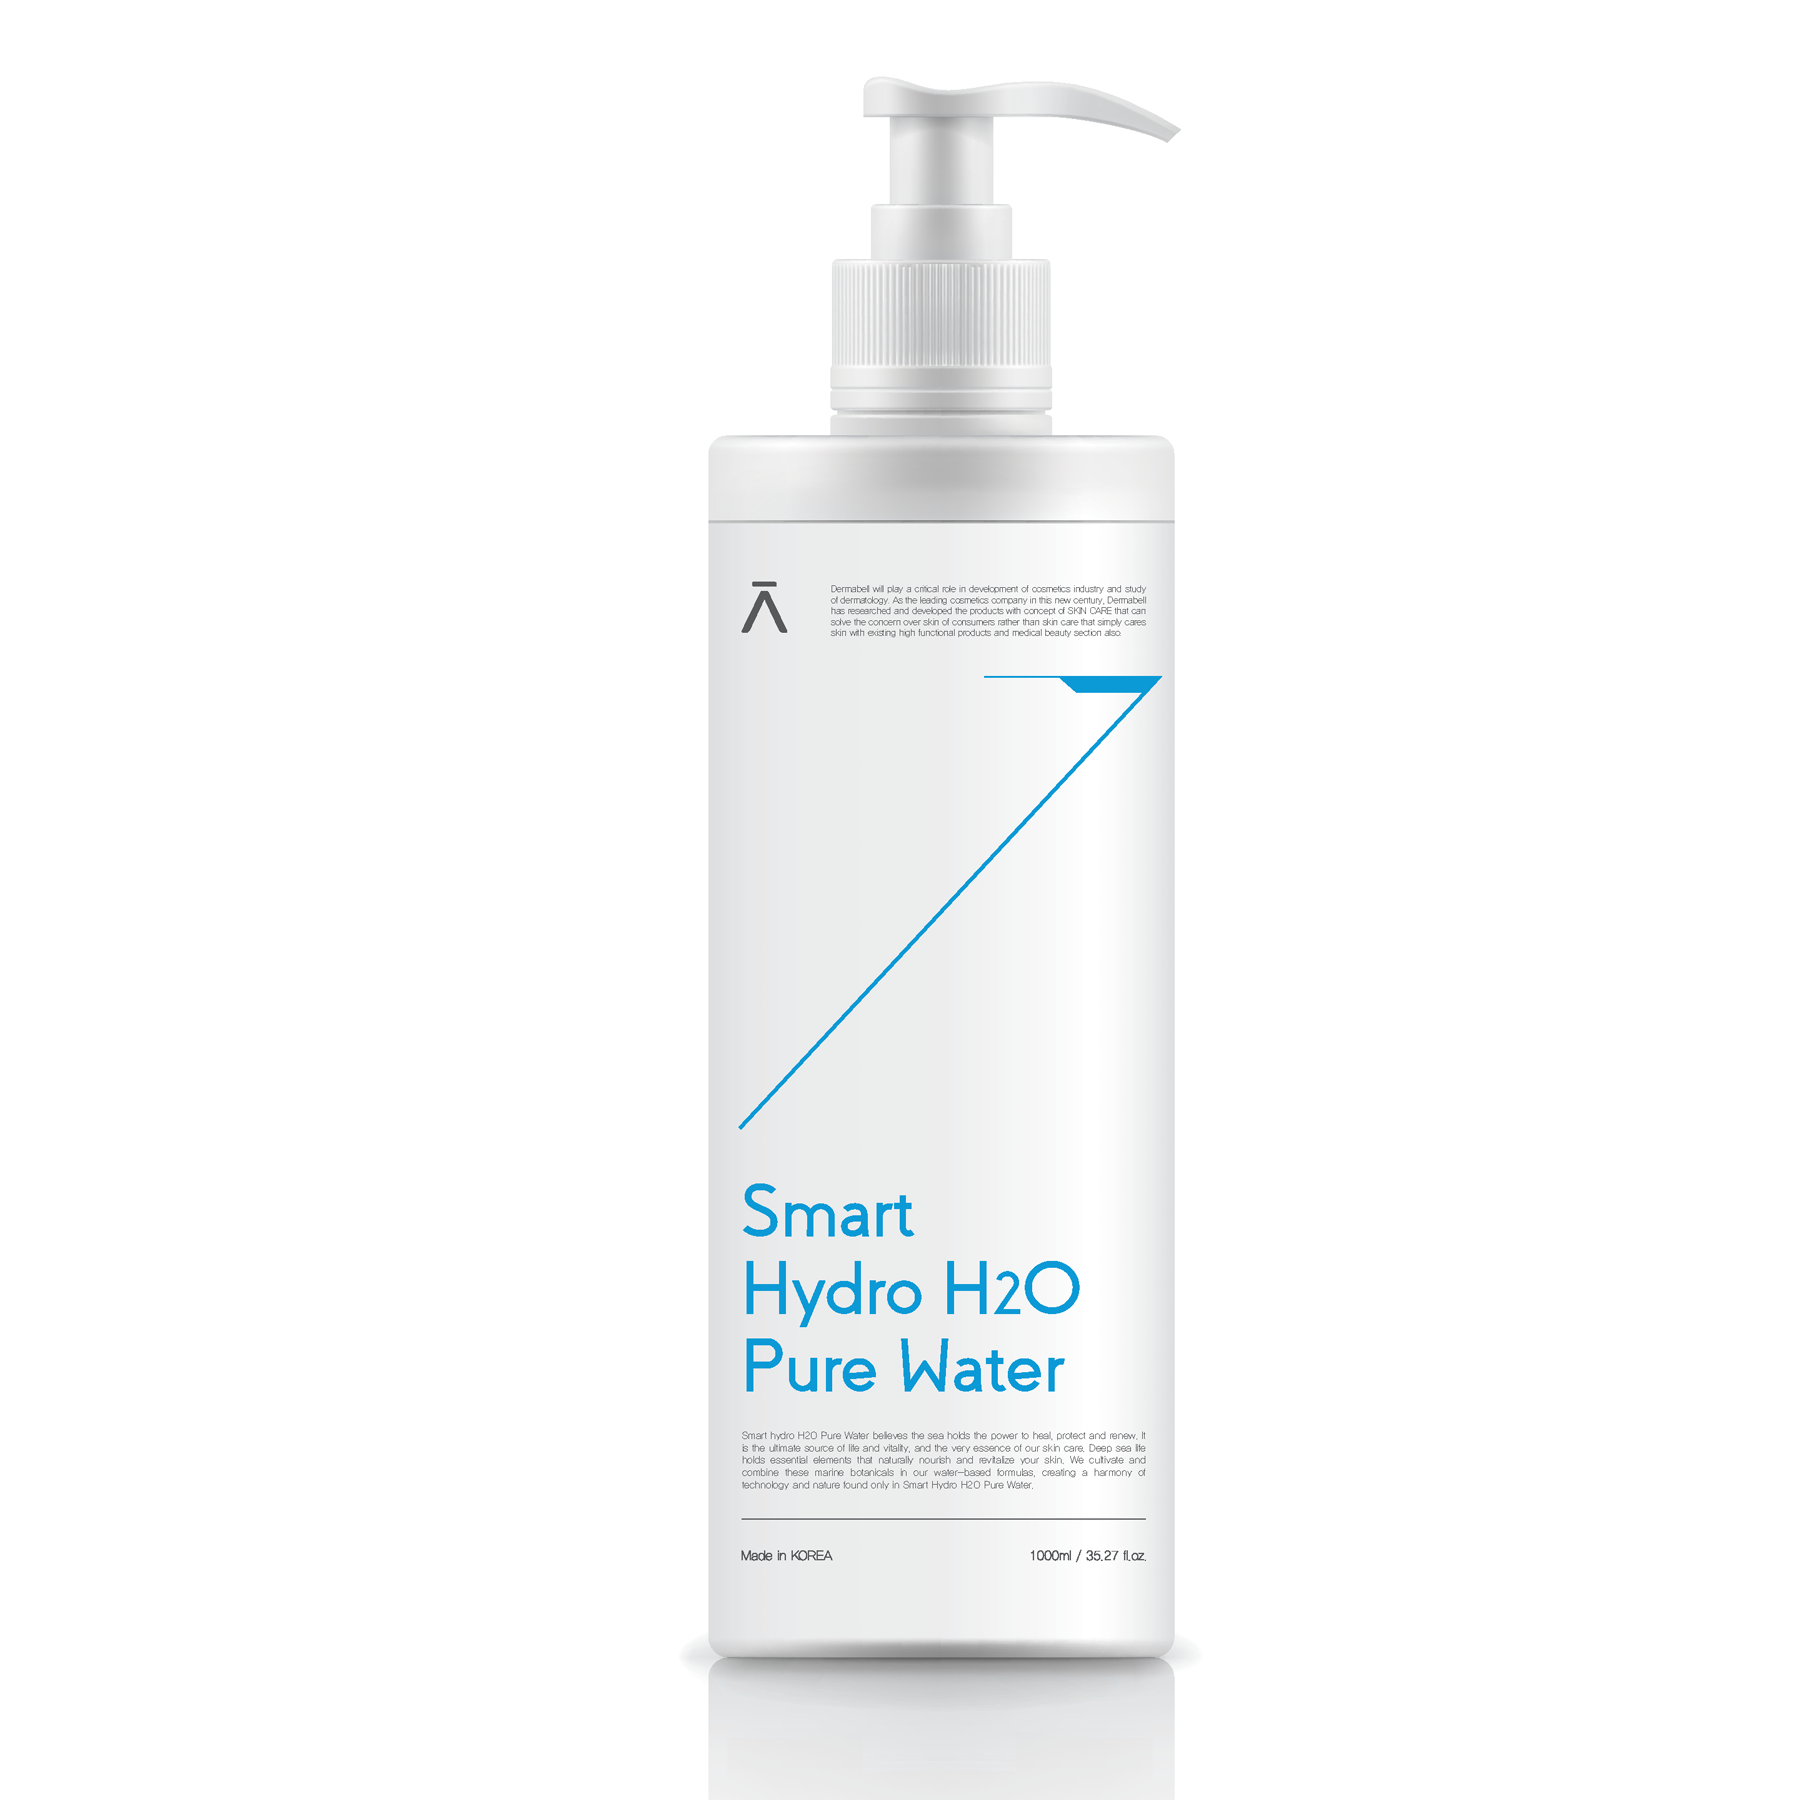 Smart Hydro H2O Pure Water Smart Water by DERMABELL PRO